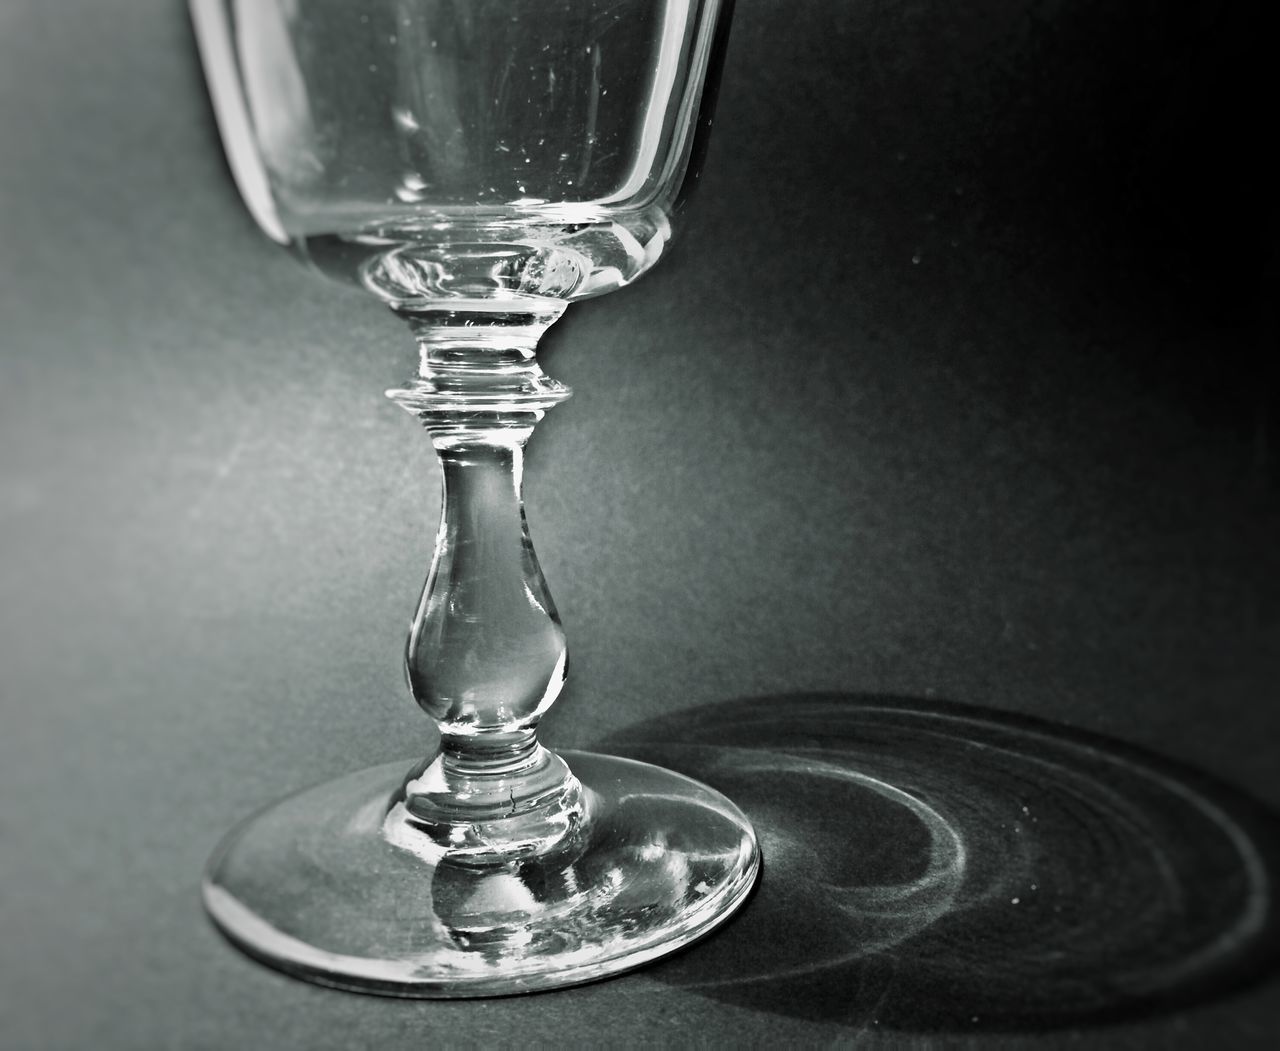 indoors, close-up, glass - material, transparent, still life, drinking glass, water, single object, reflection, wineglass, table, no people, refreshment, metal, shiny, glass, drop, studio shot, motion, focus on foreground